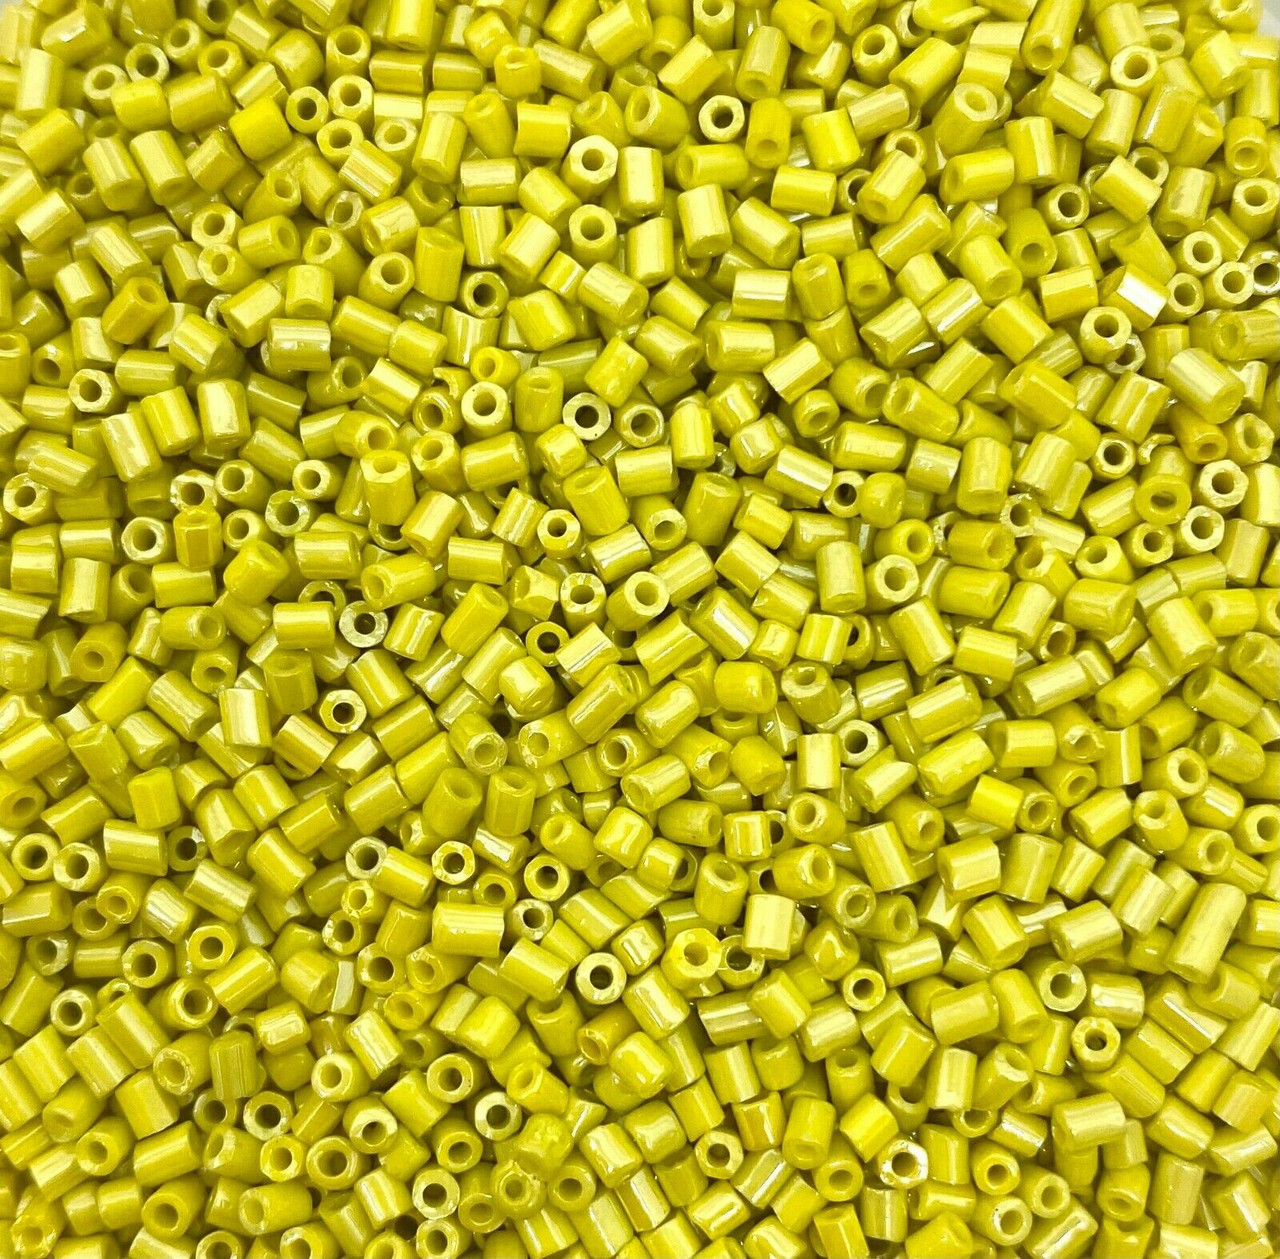 50g glass HEX seed beads - Yellow Opaque Lustred - size 11/0 (approx 2mm)